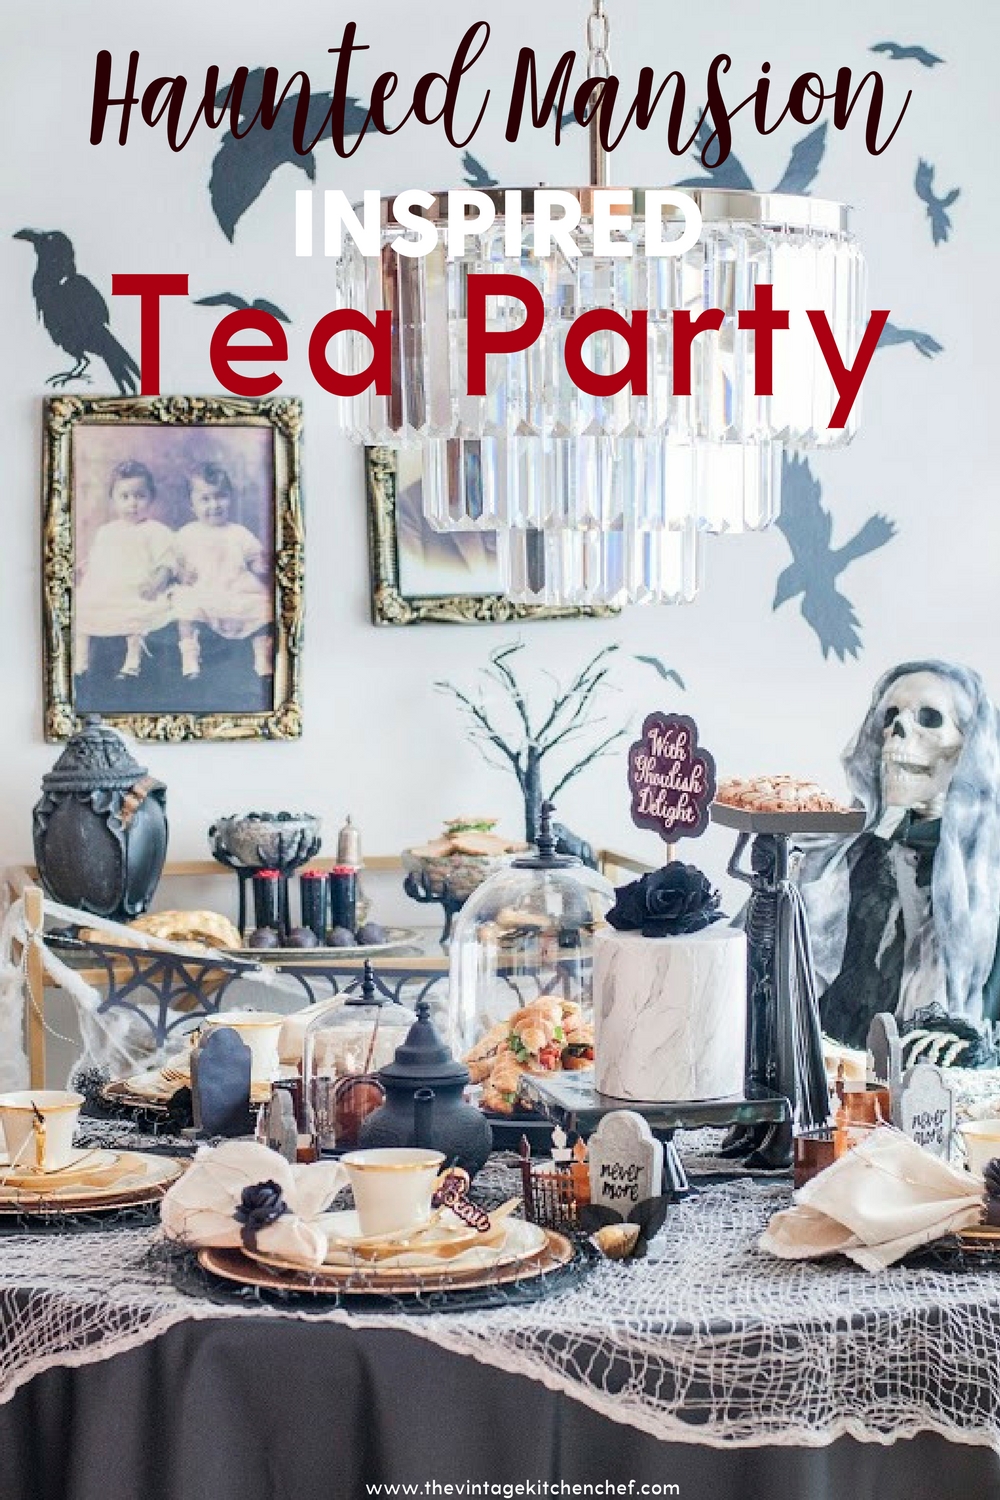 What's more fun than a Halloween tea party? A Haunted Mansion Inspired Tea Party, of course, complete with ghosts, ghouls, and delicious treats!